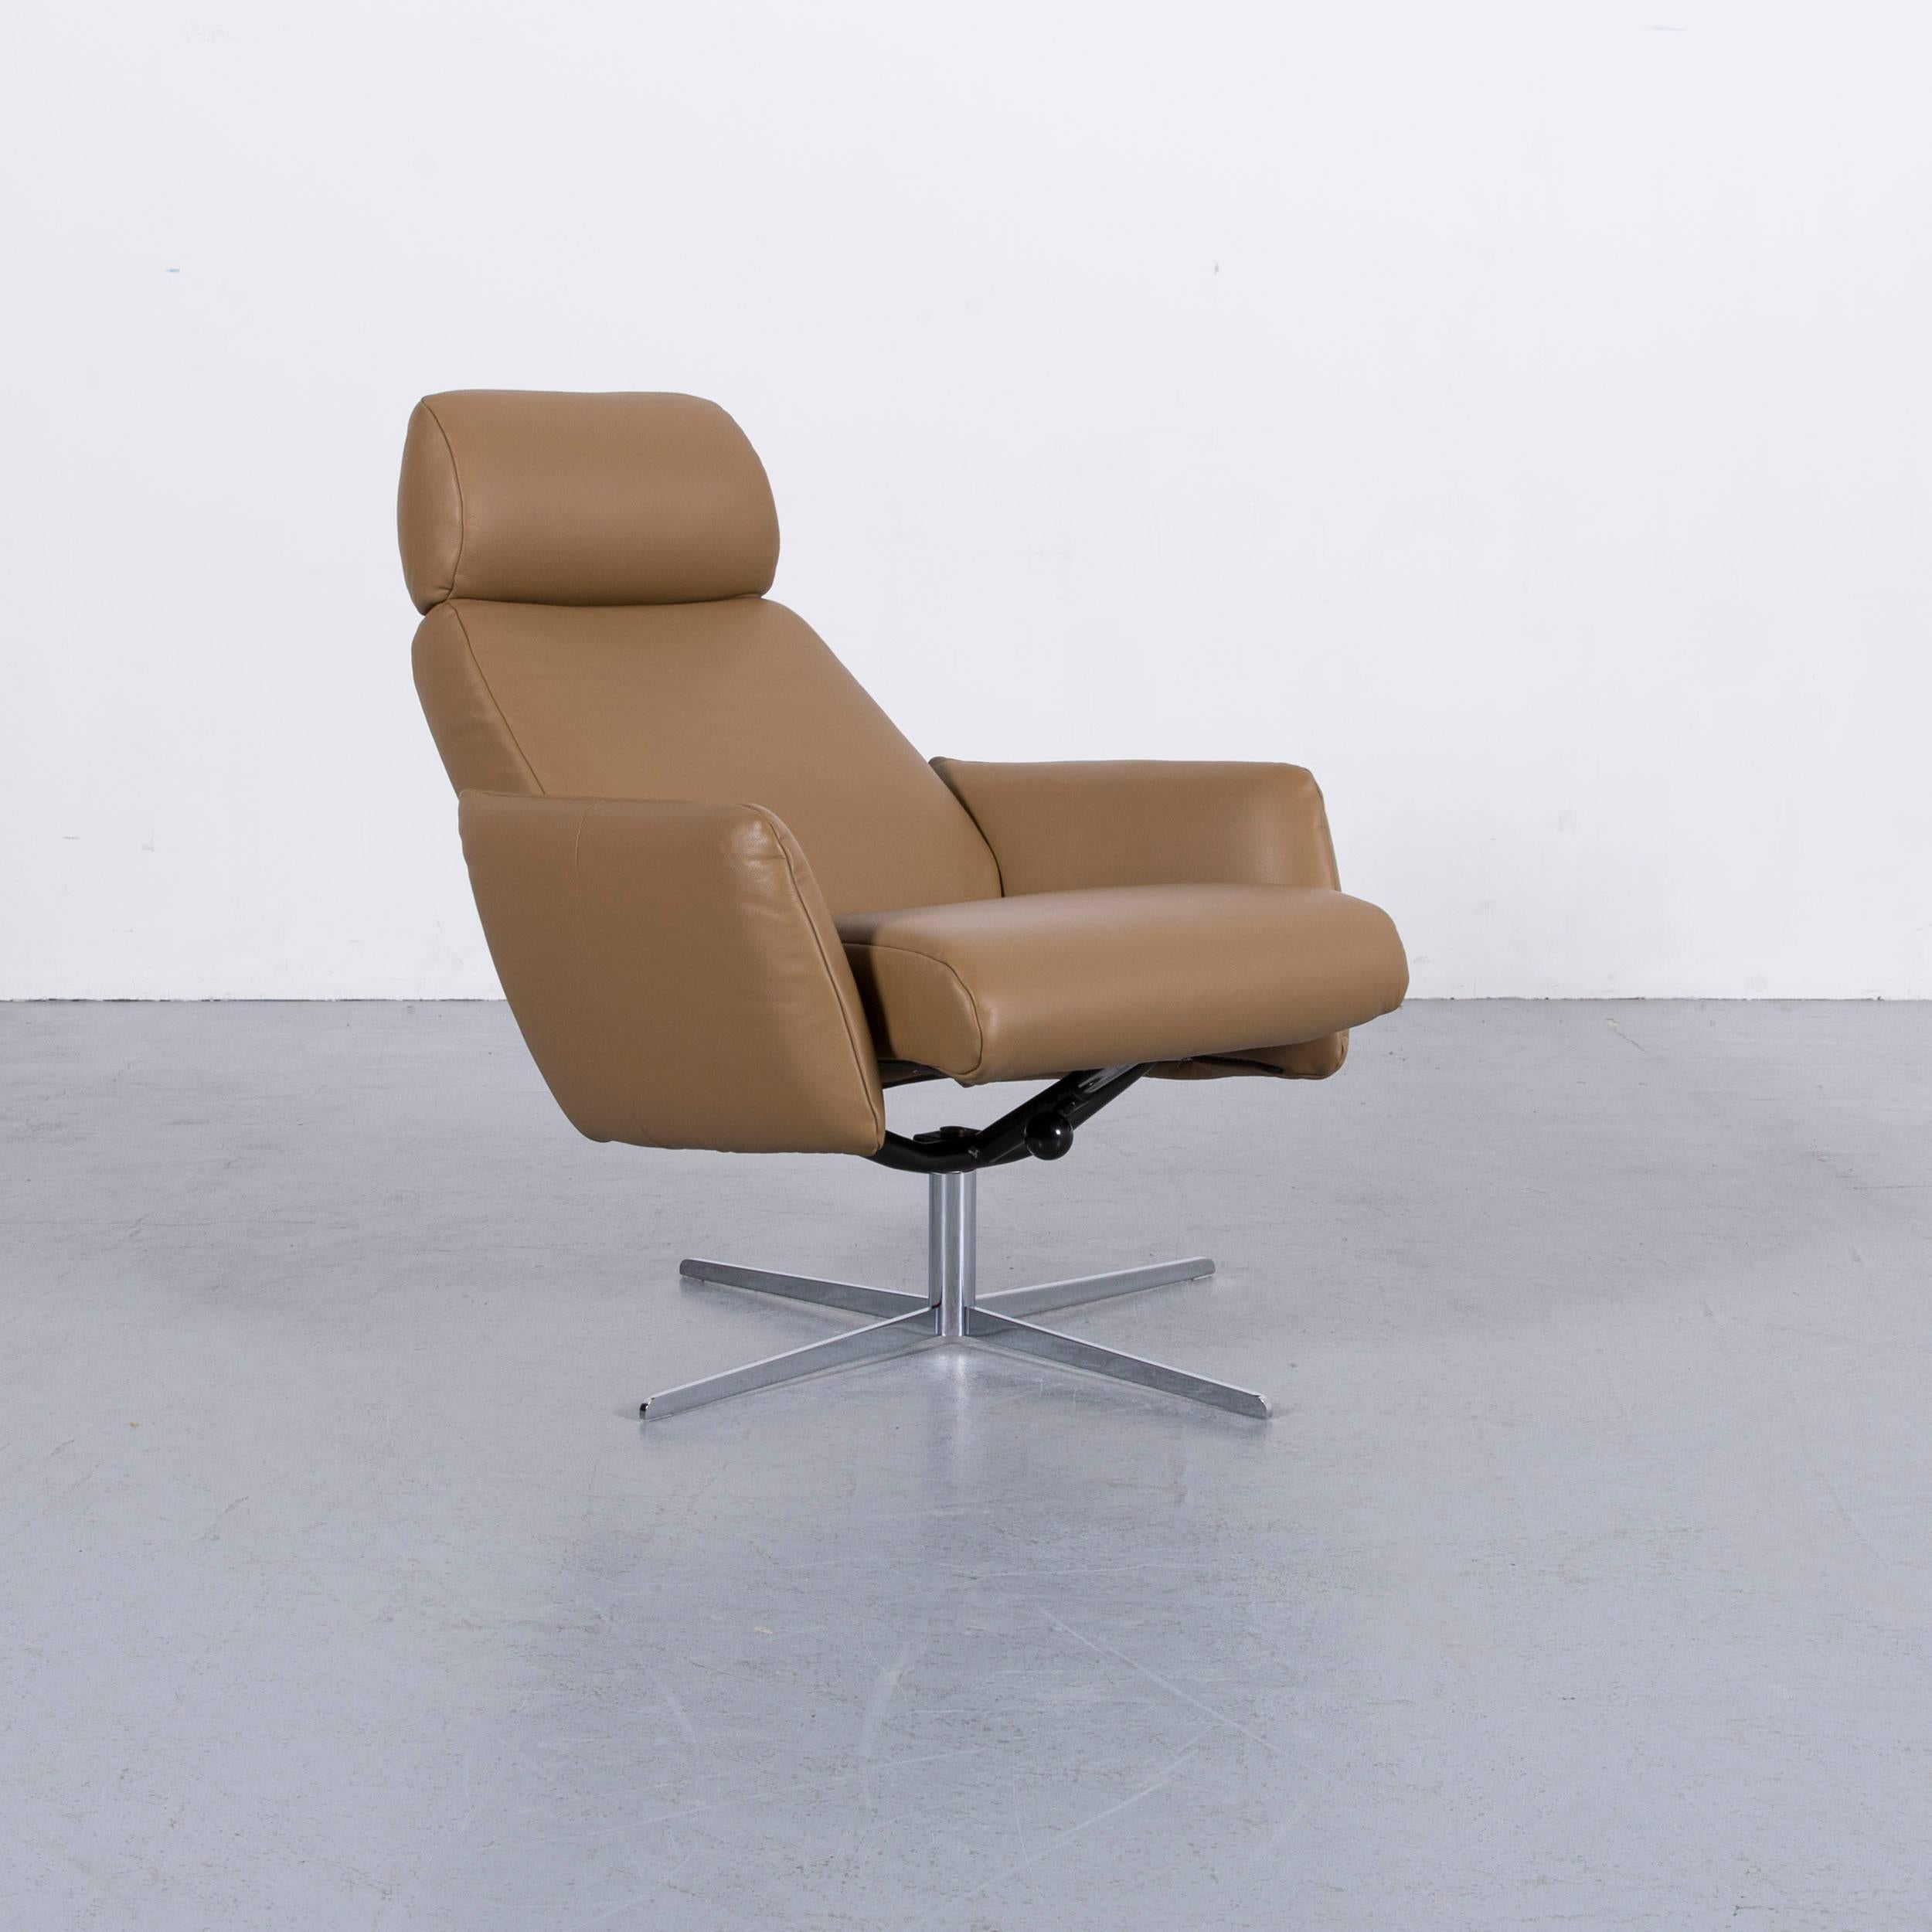 We bring to you a Rolf Benz Freistil 177 leather armchair beige brown one-seat.
































